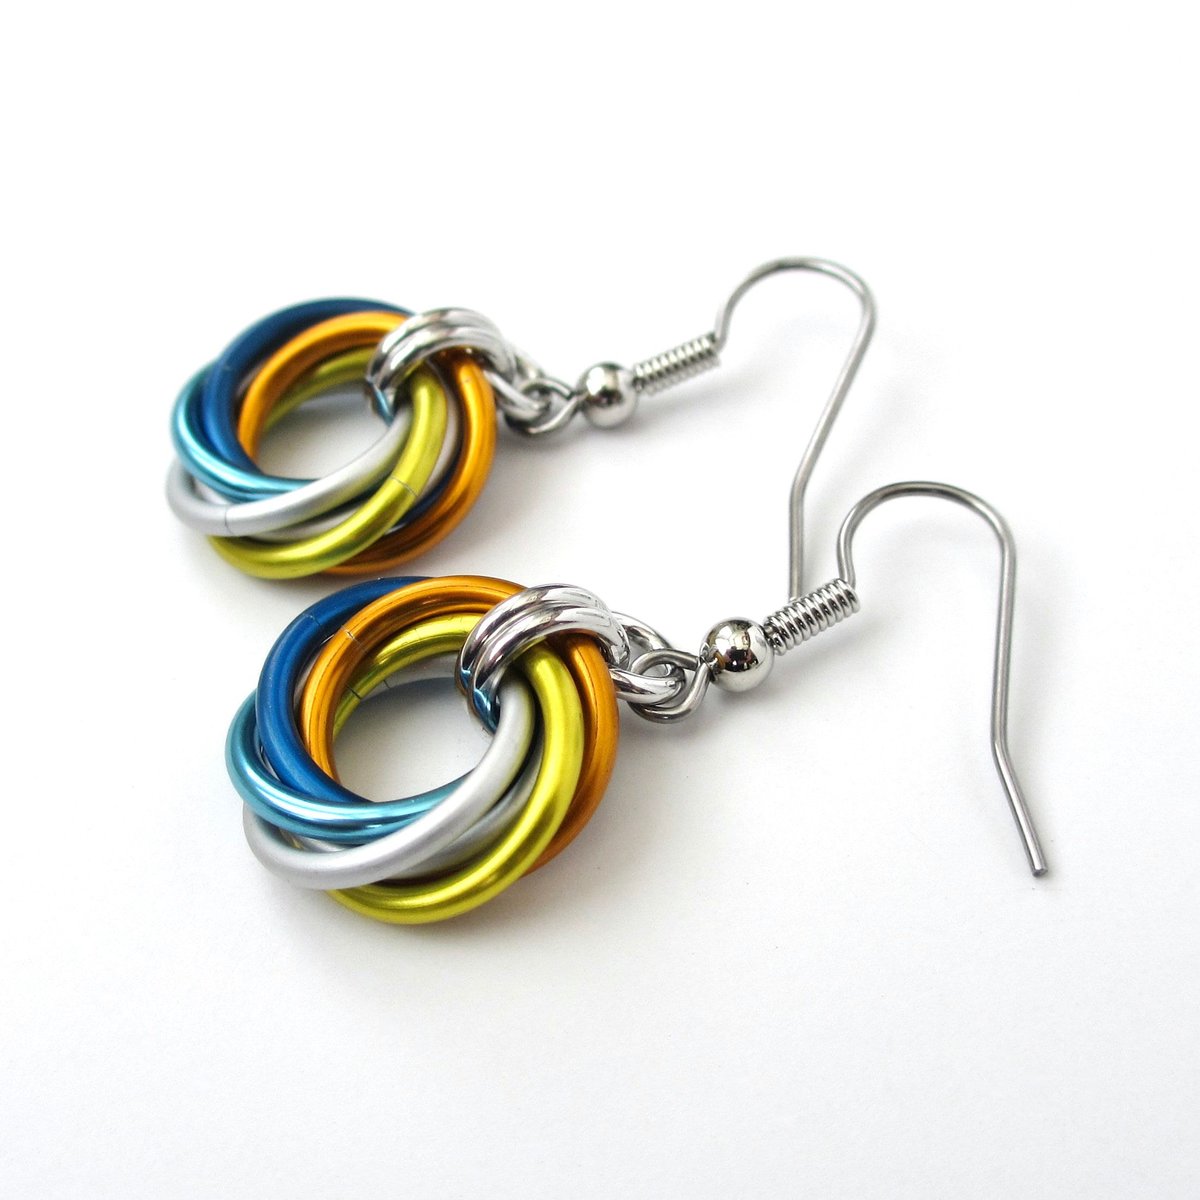 Aroace pride earrings, LGBTQIA chainmail love knot jewelry, aromantic asexual gifts